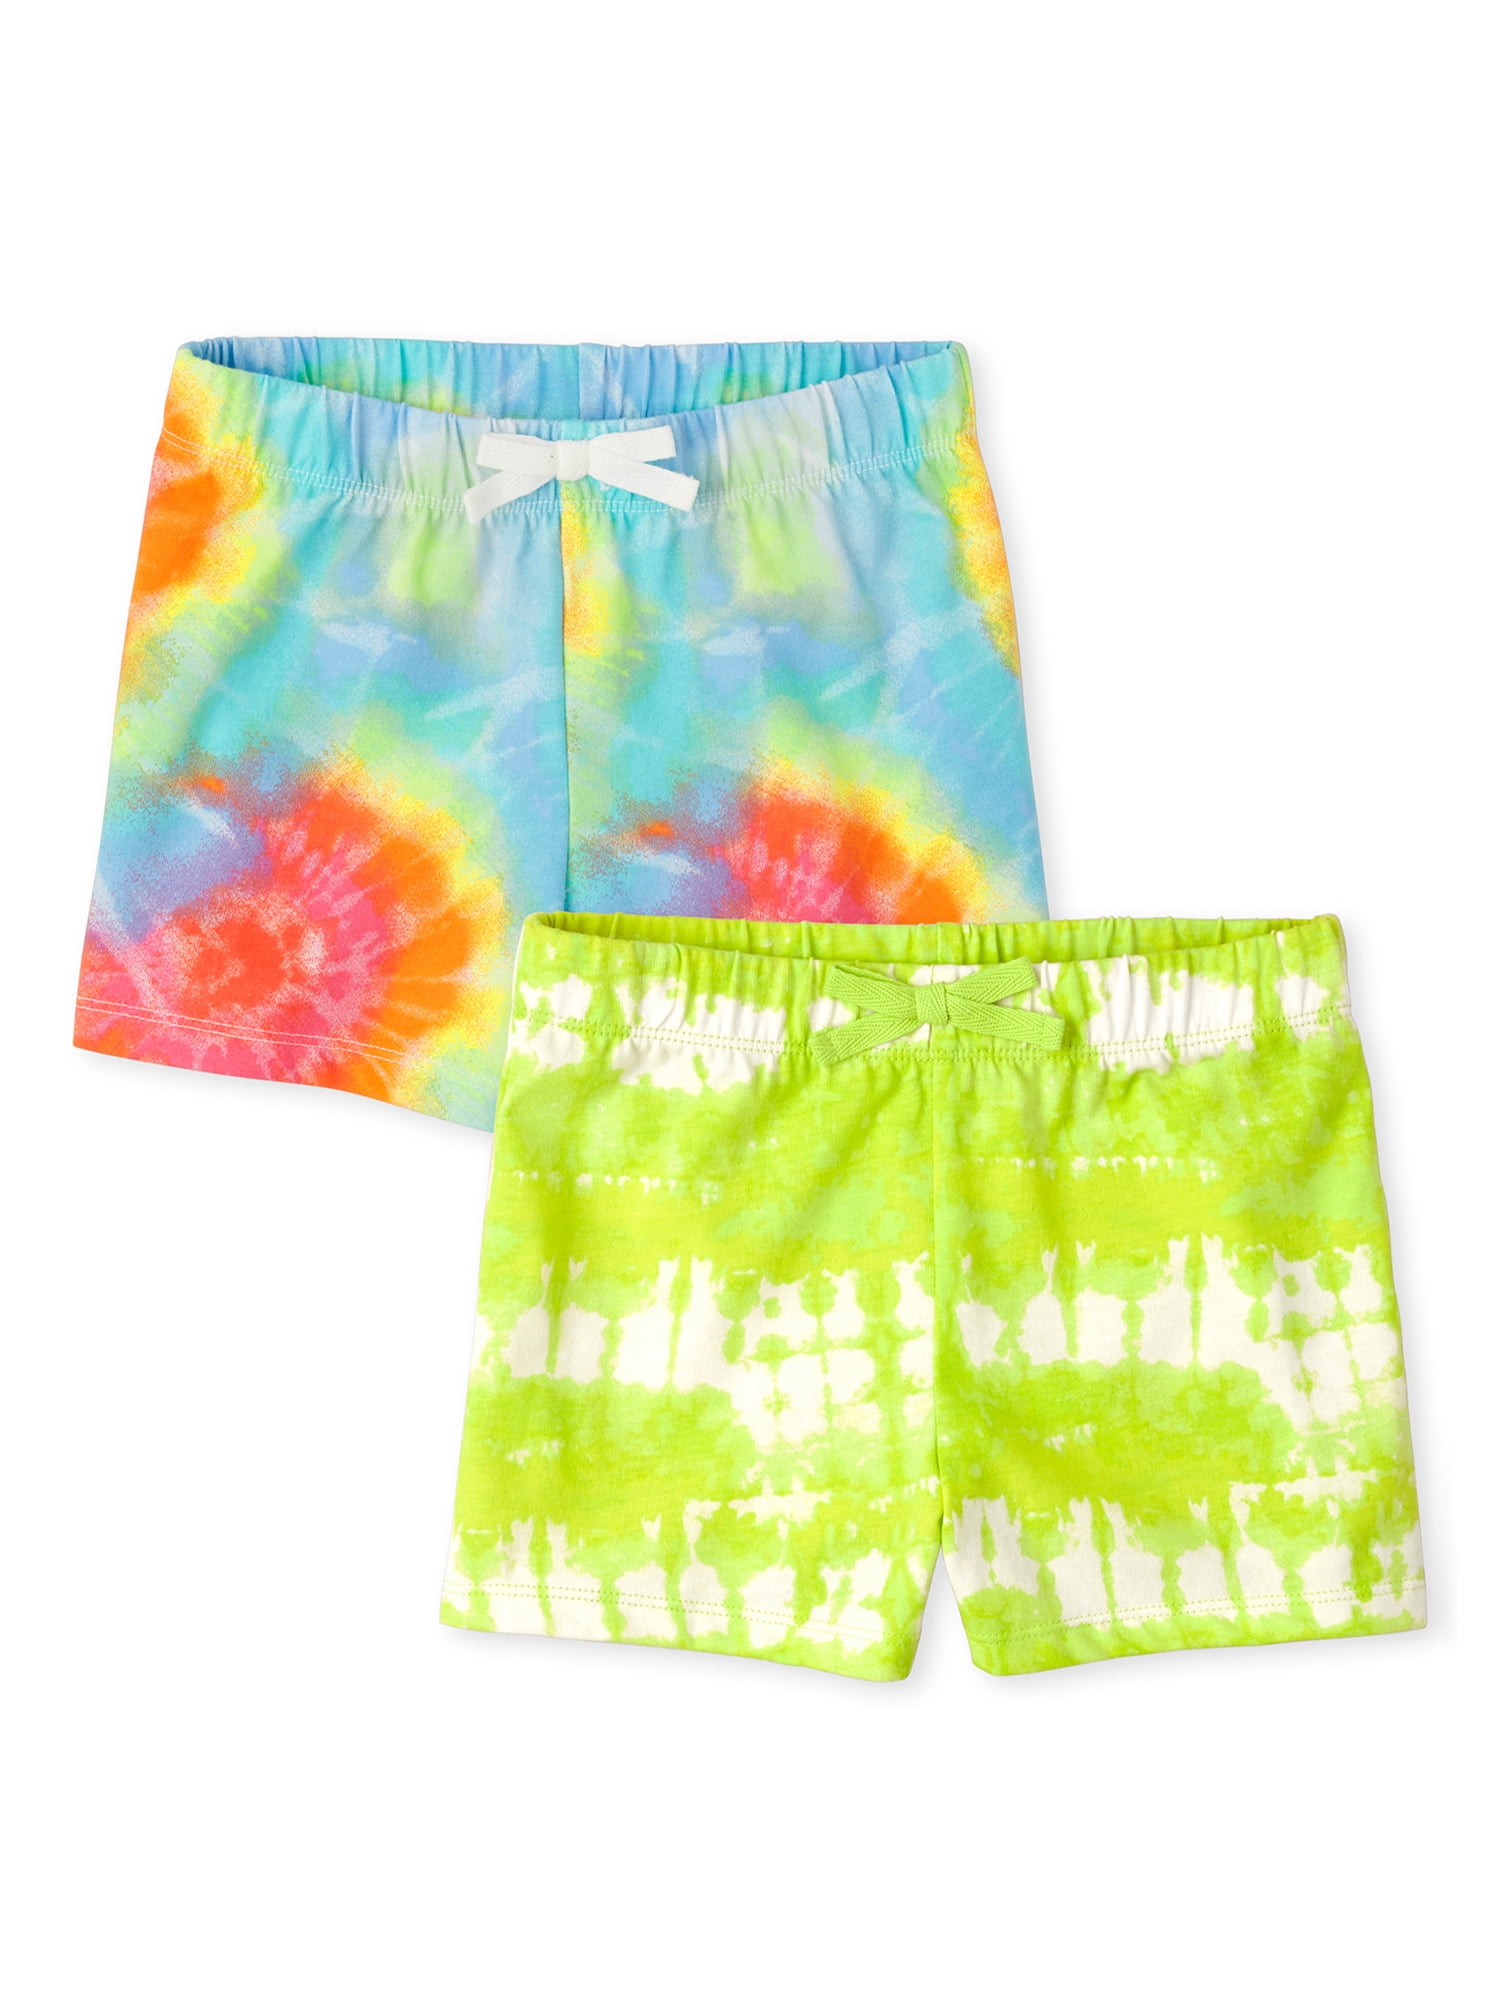 The Childrens Place Baby Girls Solid Drawstring Shorts